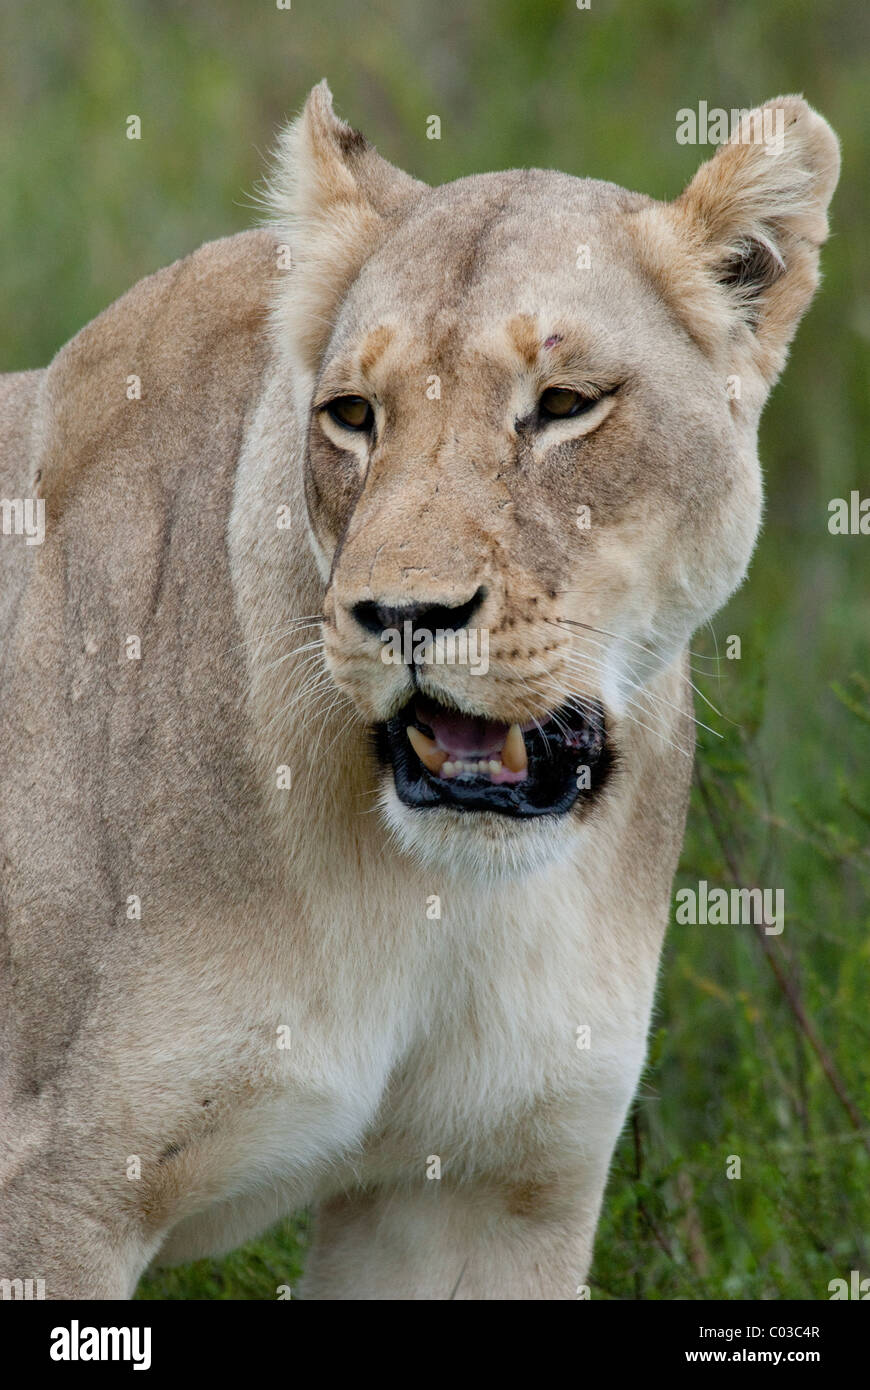 South Africa, East London, Inkwenkwezi Private Game Reserve. African lion (Wild: Panthera leo), lioness. Stock Photo